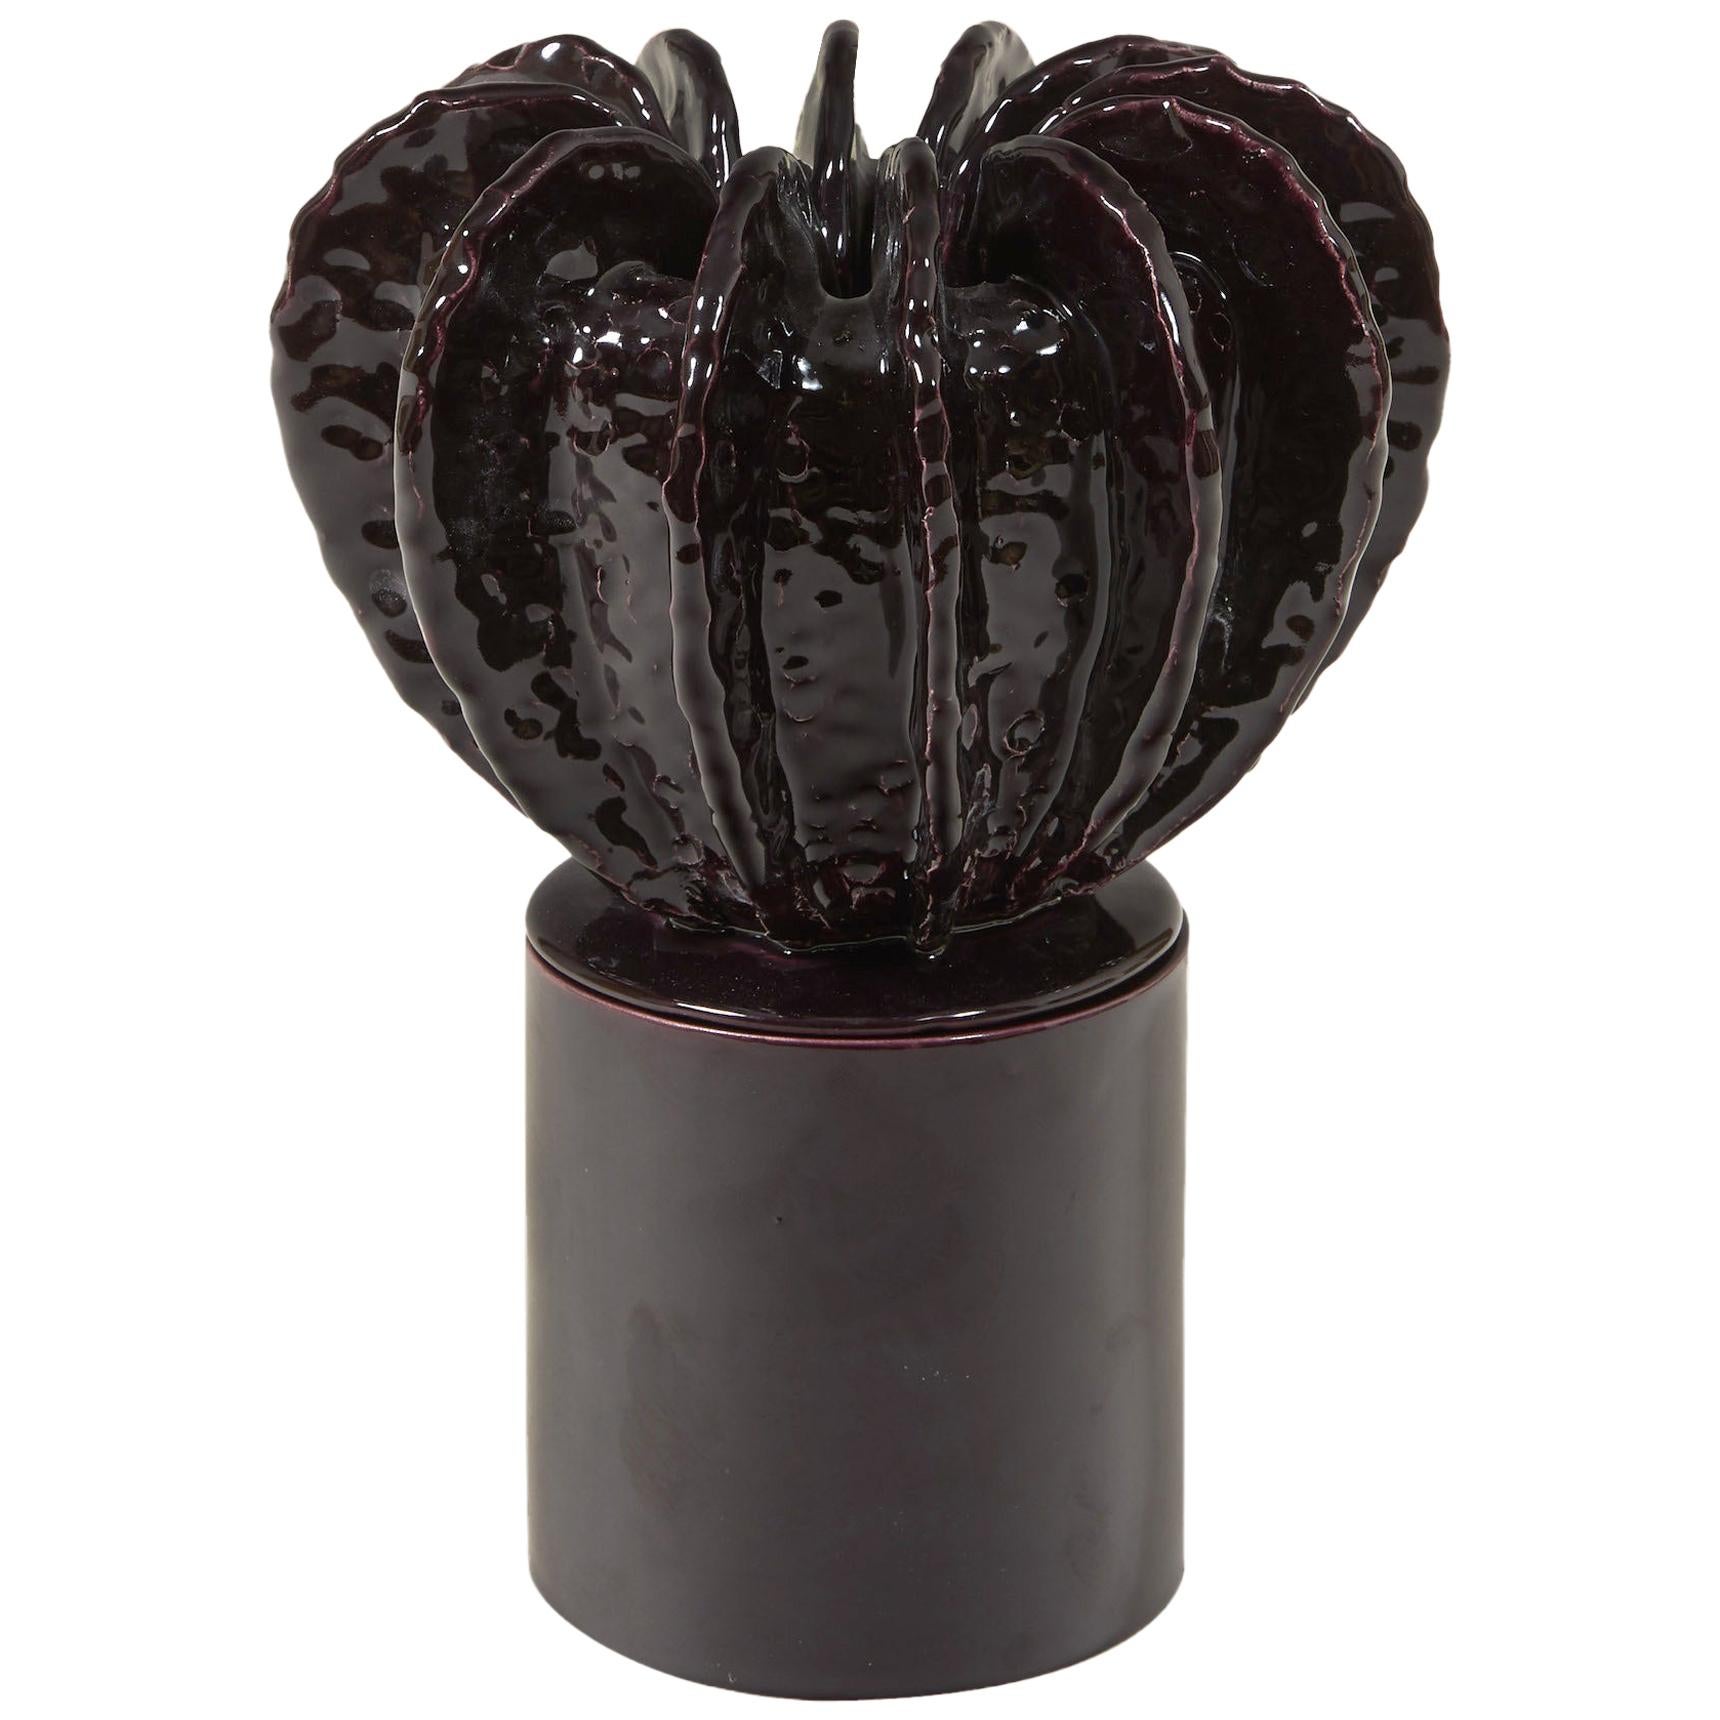 Glazed Purple Medium Candleholder with Sculpted Lid by Laura Gonzalez